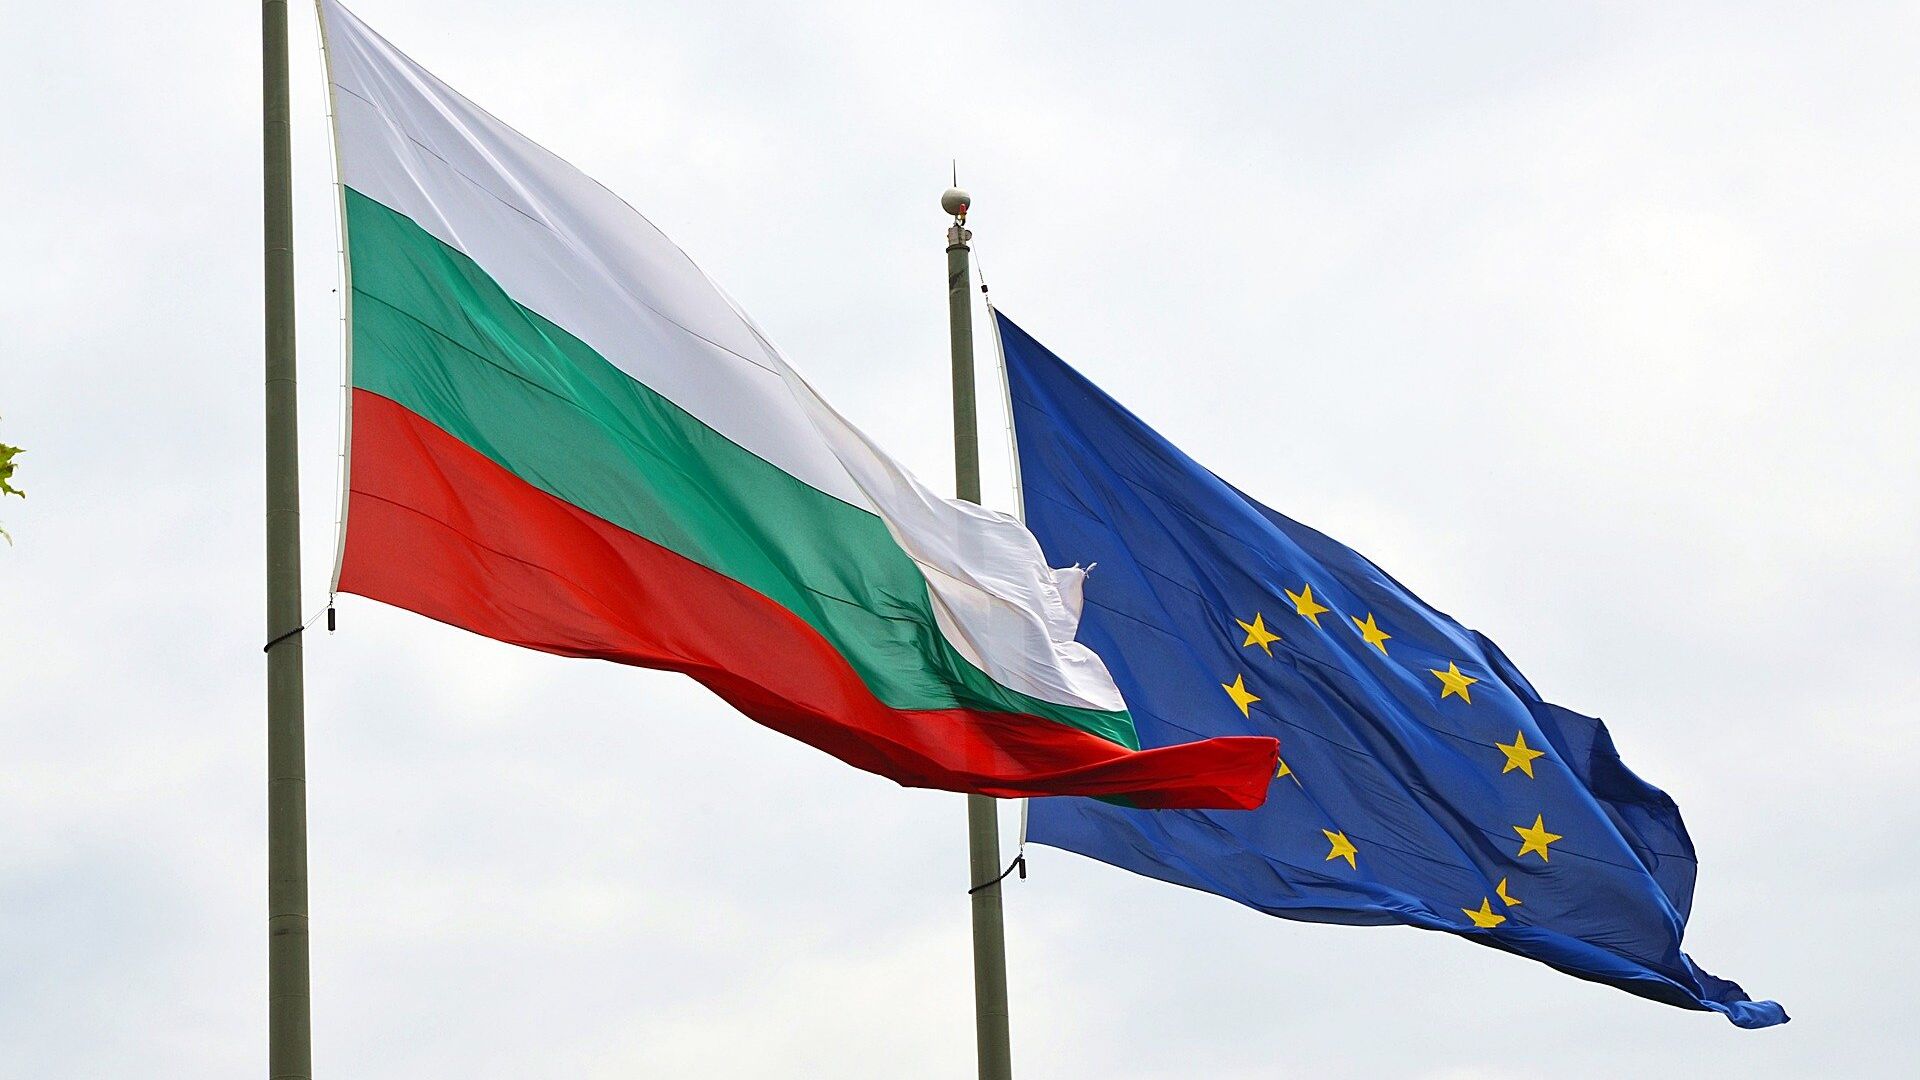 Bulgarian and EU flags. The Balkan nation joined the supranational union in 2007. - Sputnik Moldova, 1920, 05.12.2022